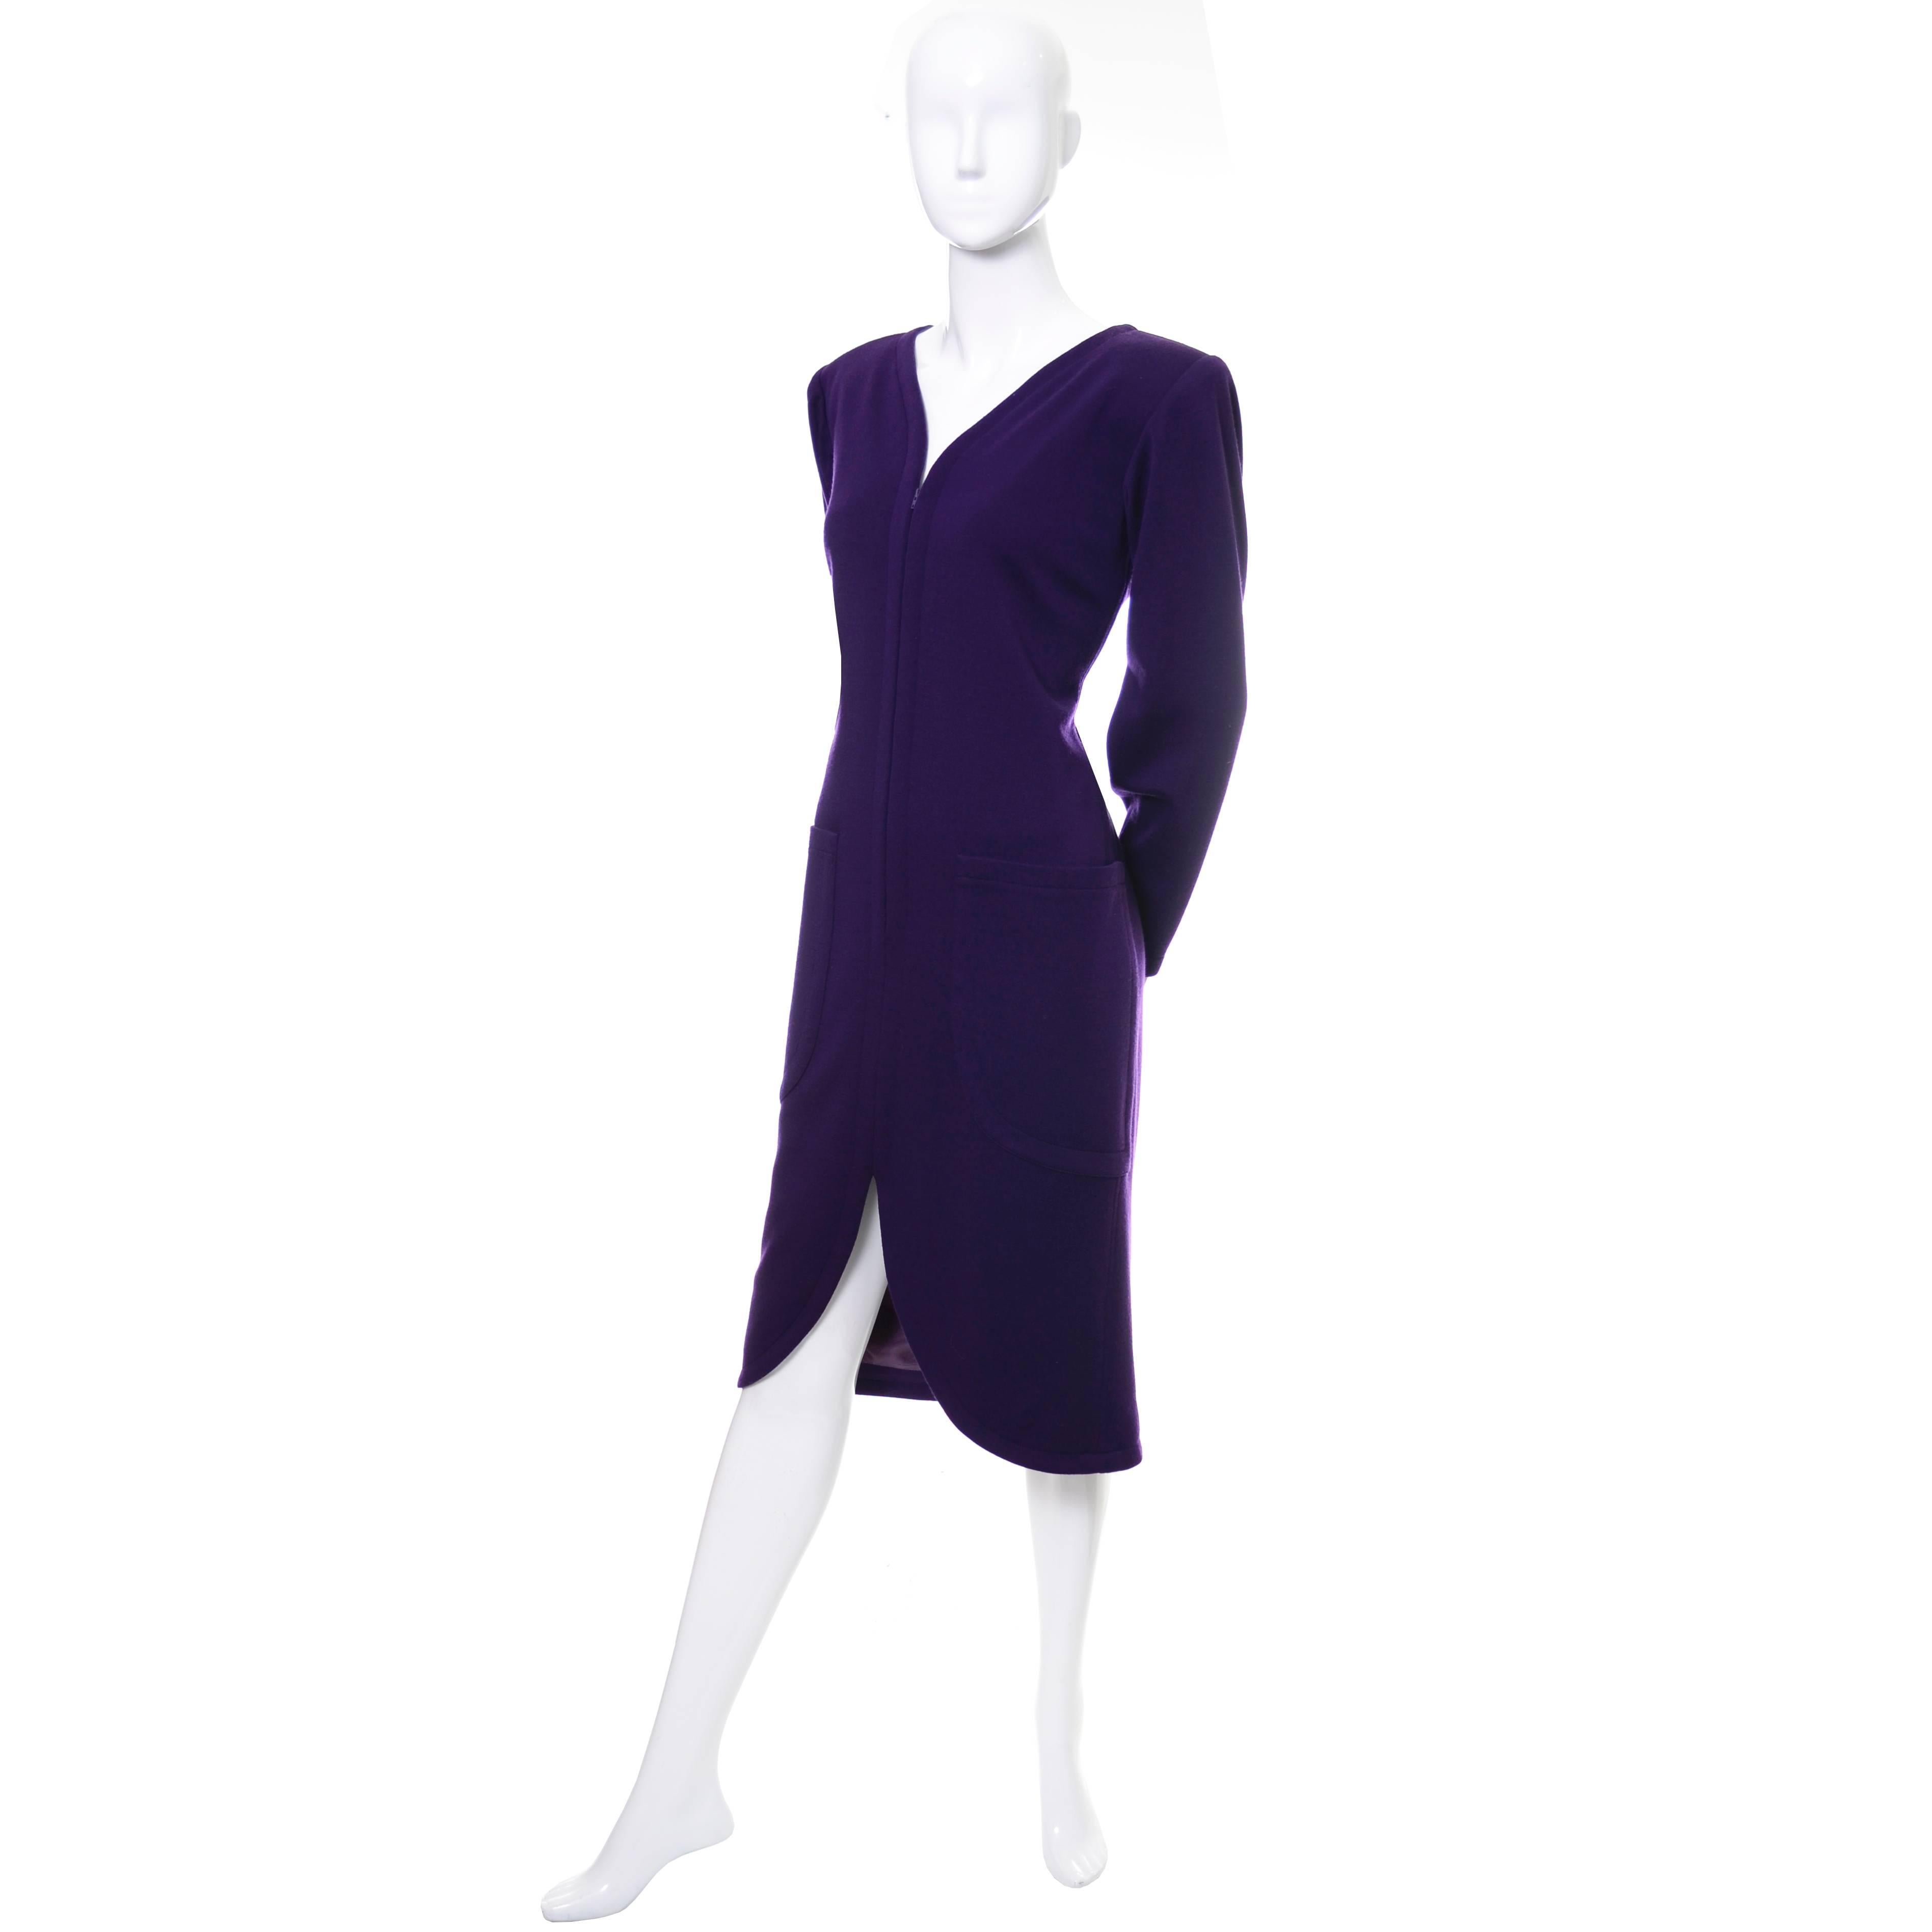 This beautiful YSL vintage dress came from the collection of a woman who purchased many incredible Saint Laurent pieces, mainly in the 1980's and 1990's. This dress has great pockets and zips up the front.  The Saint Laurent Rive Gauche dress has a